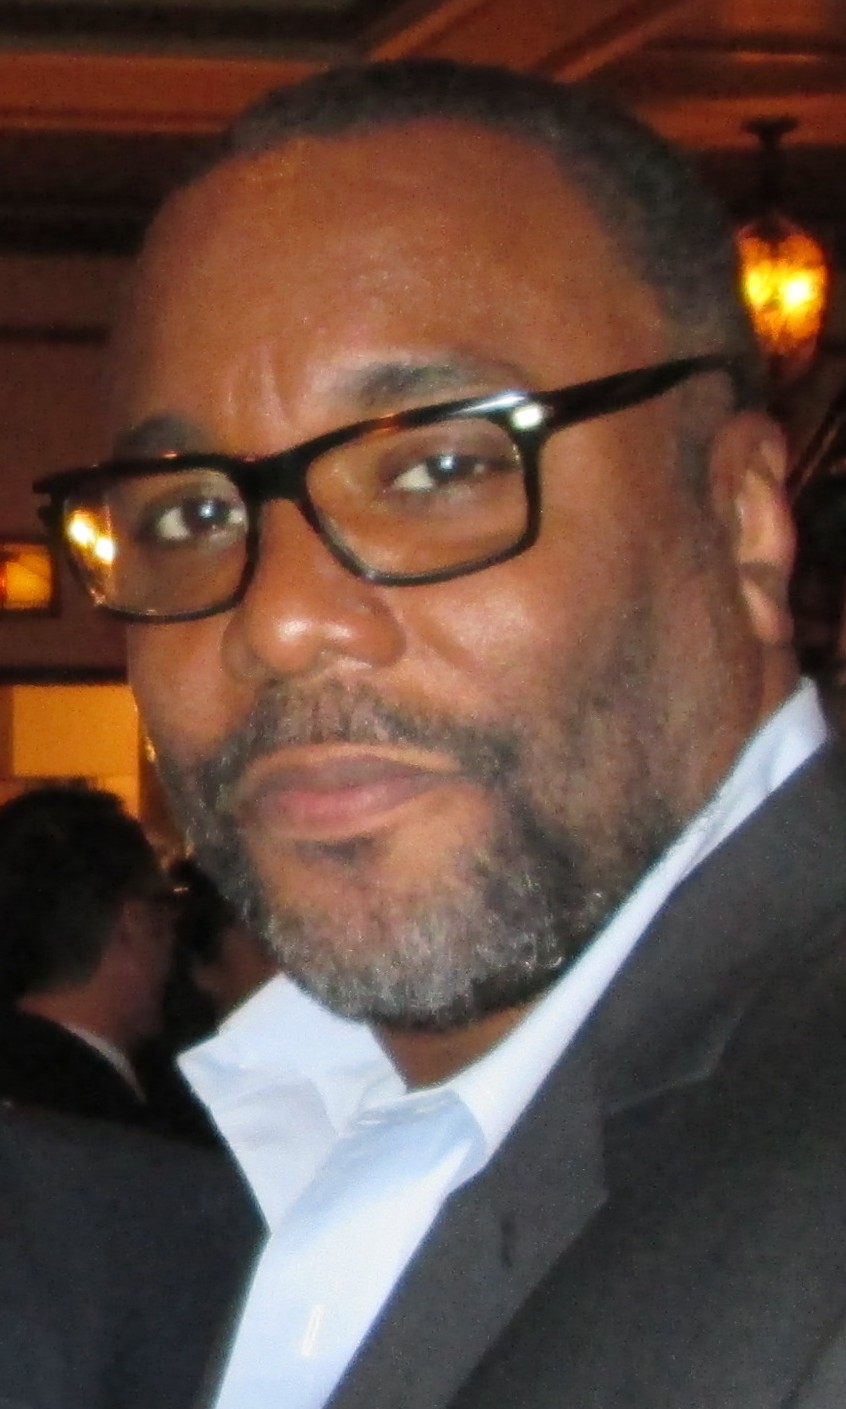 Lee Daniels Using Empire To Highlight Homophobia In The Black Community